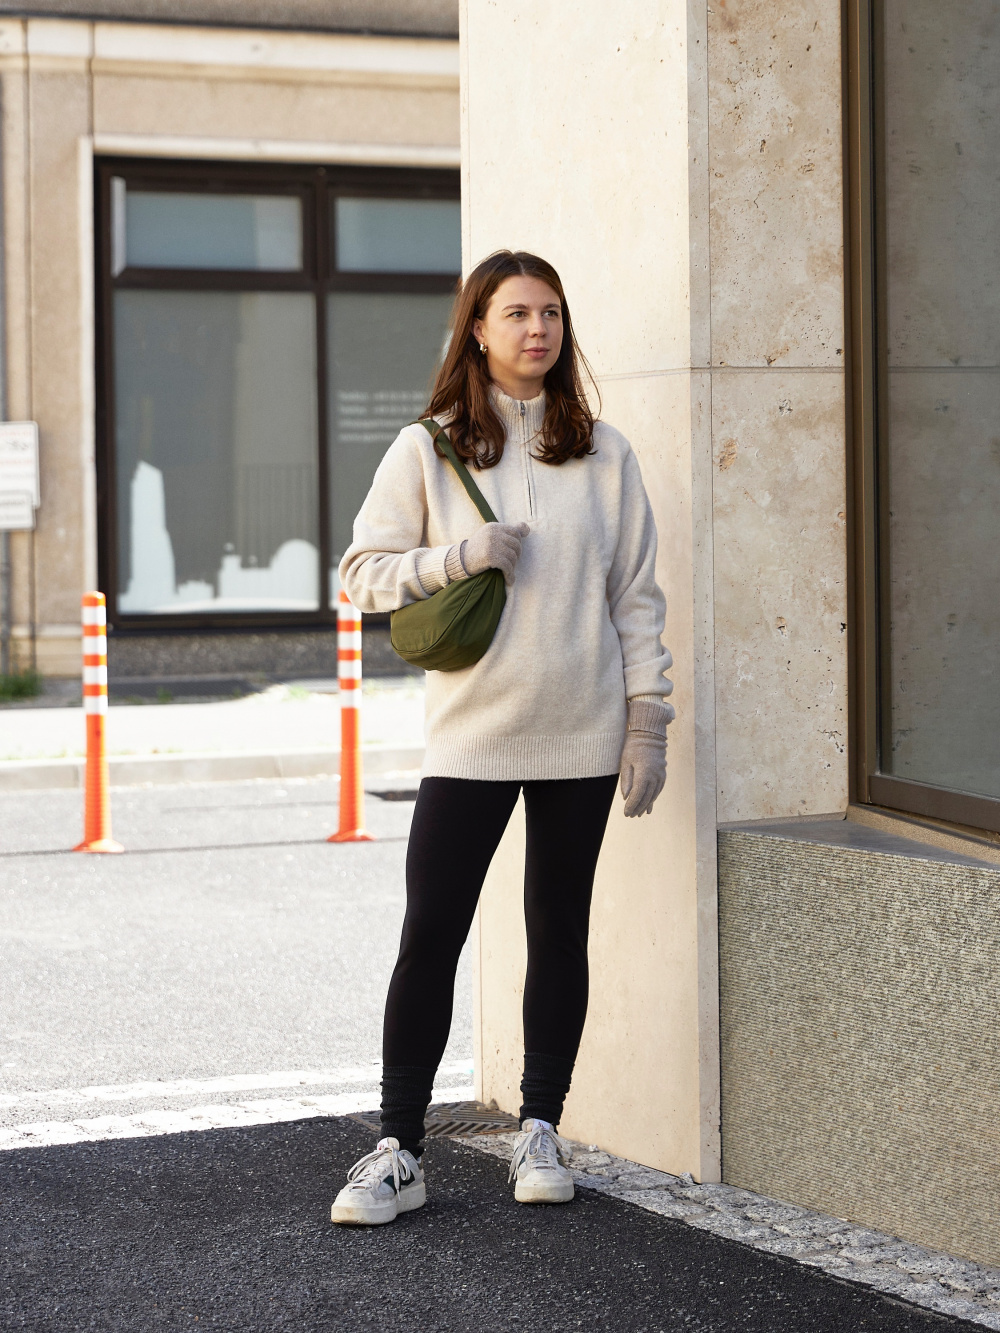 Check styling ideas for「EXTRA STRETCH DRY SWEATSHIRT、HEATTECH ULTRA WARM  TIGHTS」